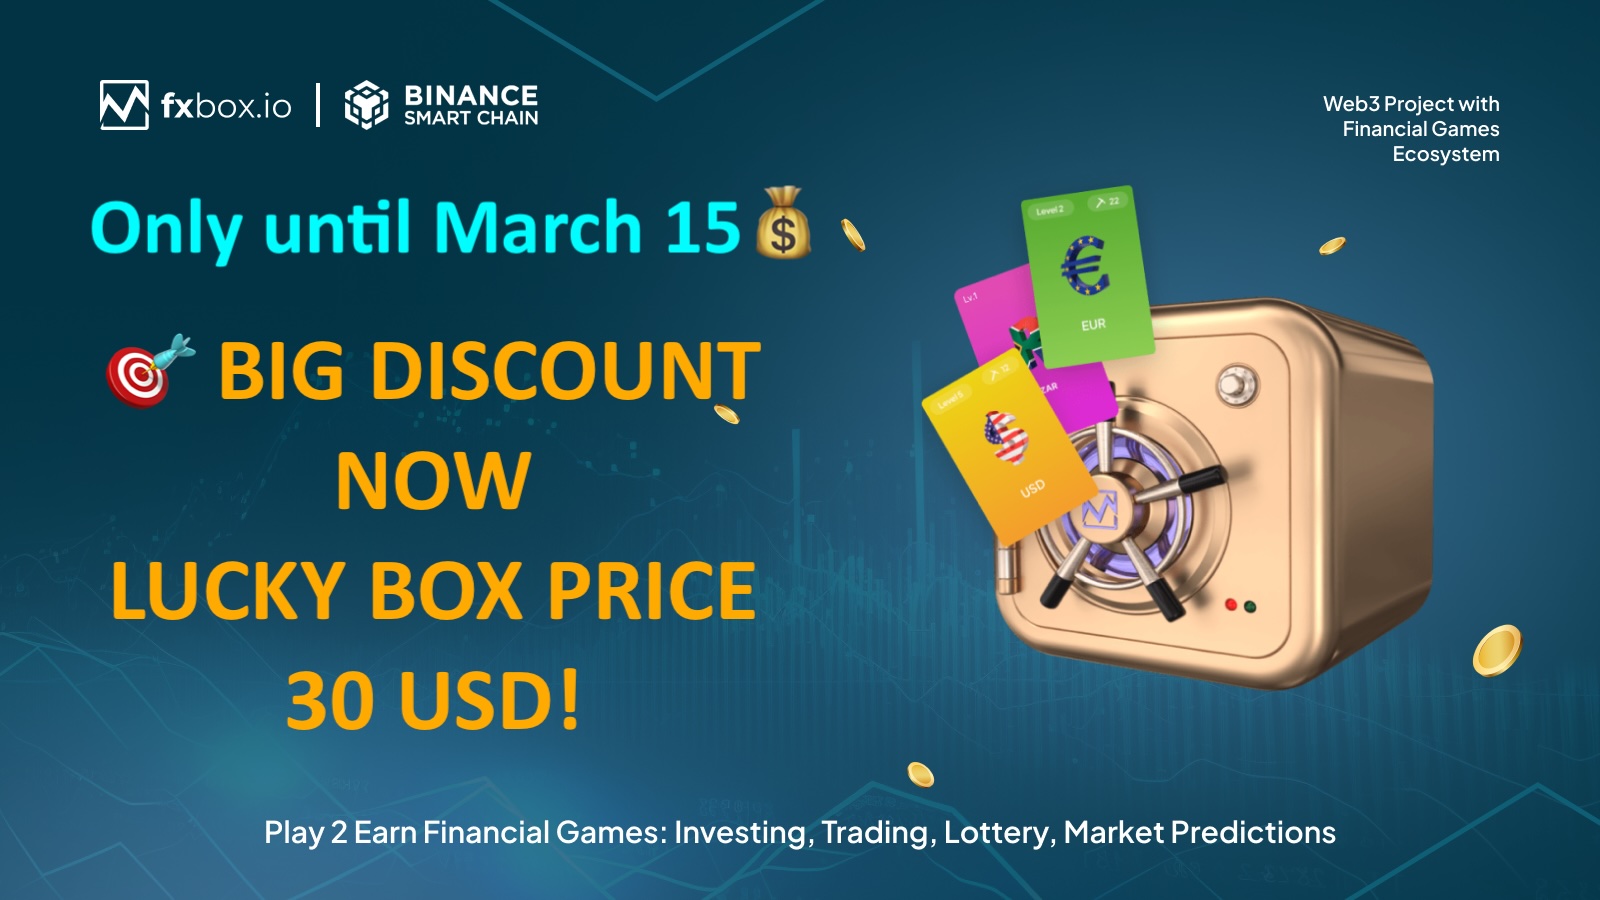 Only until March 15, BIG DISCOUNT LUCKY BOXs